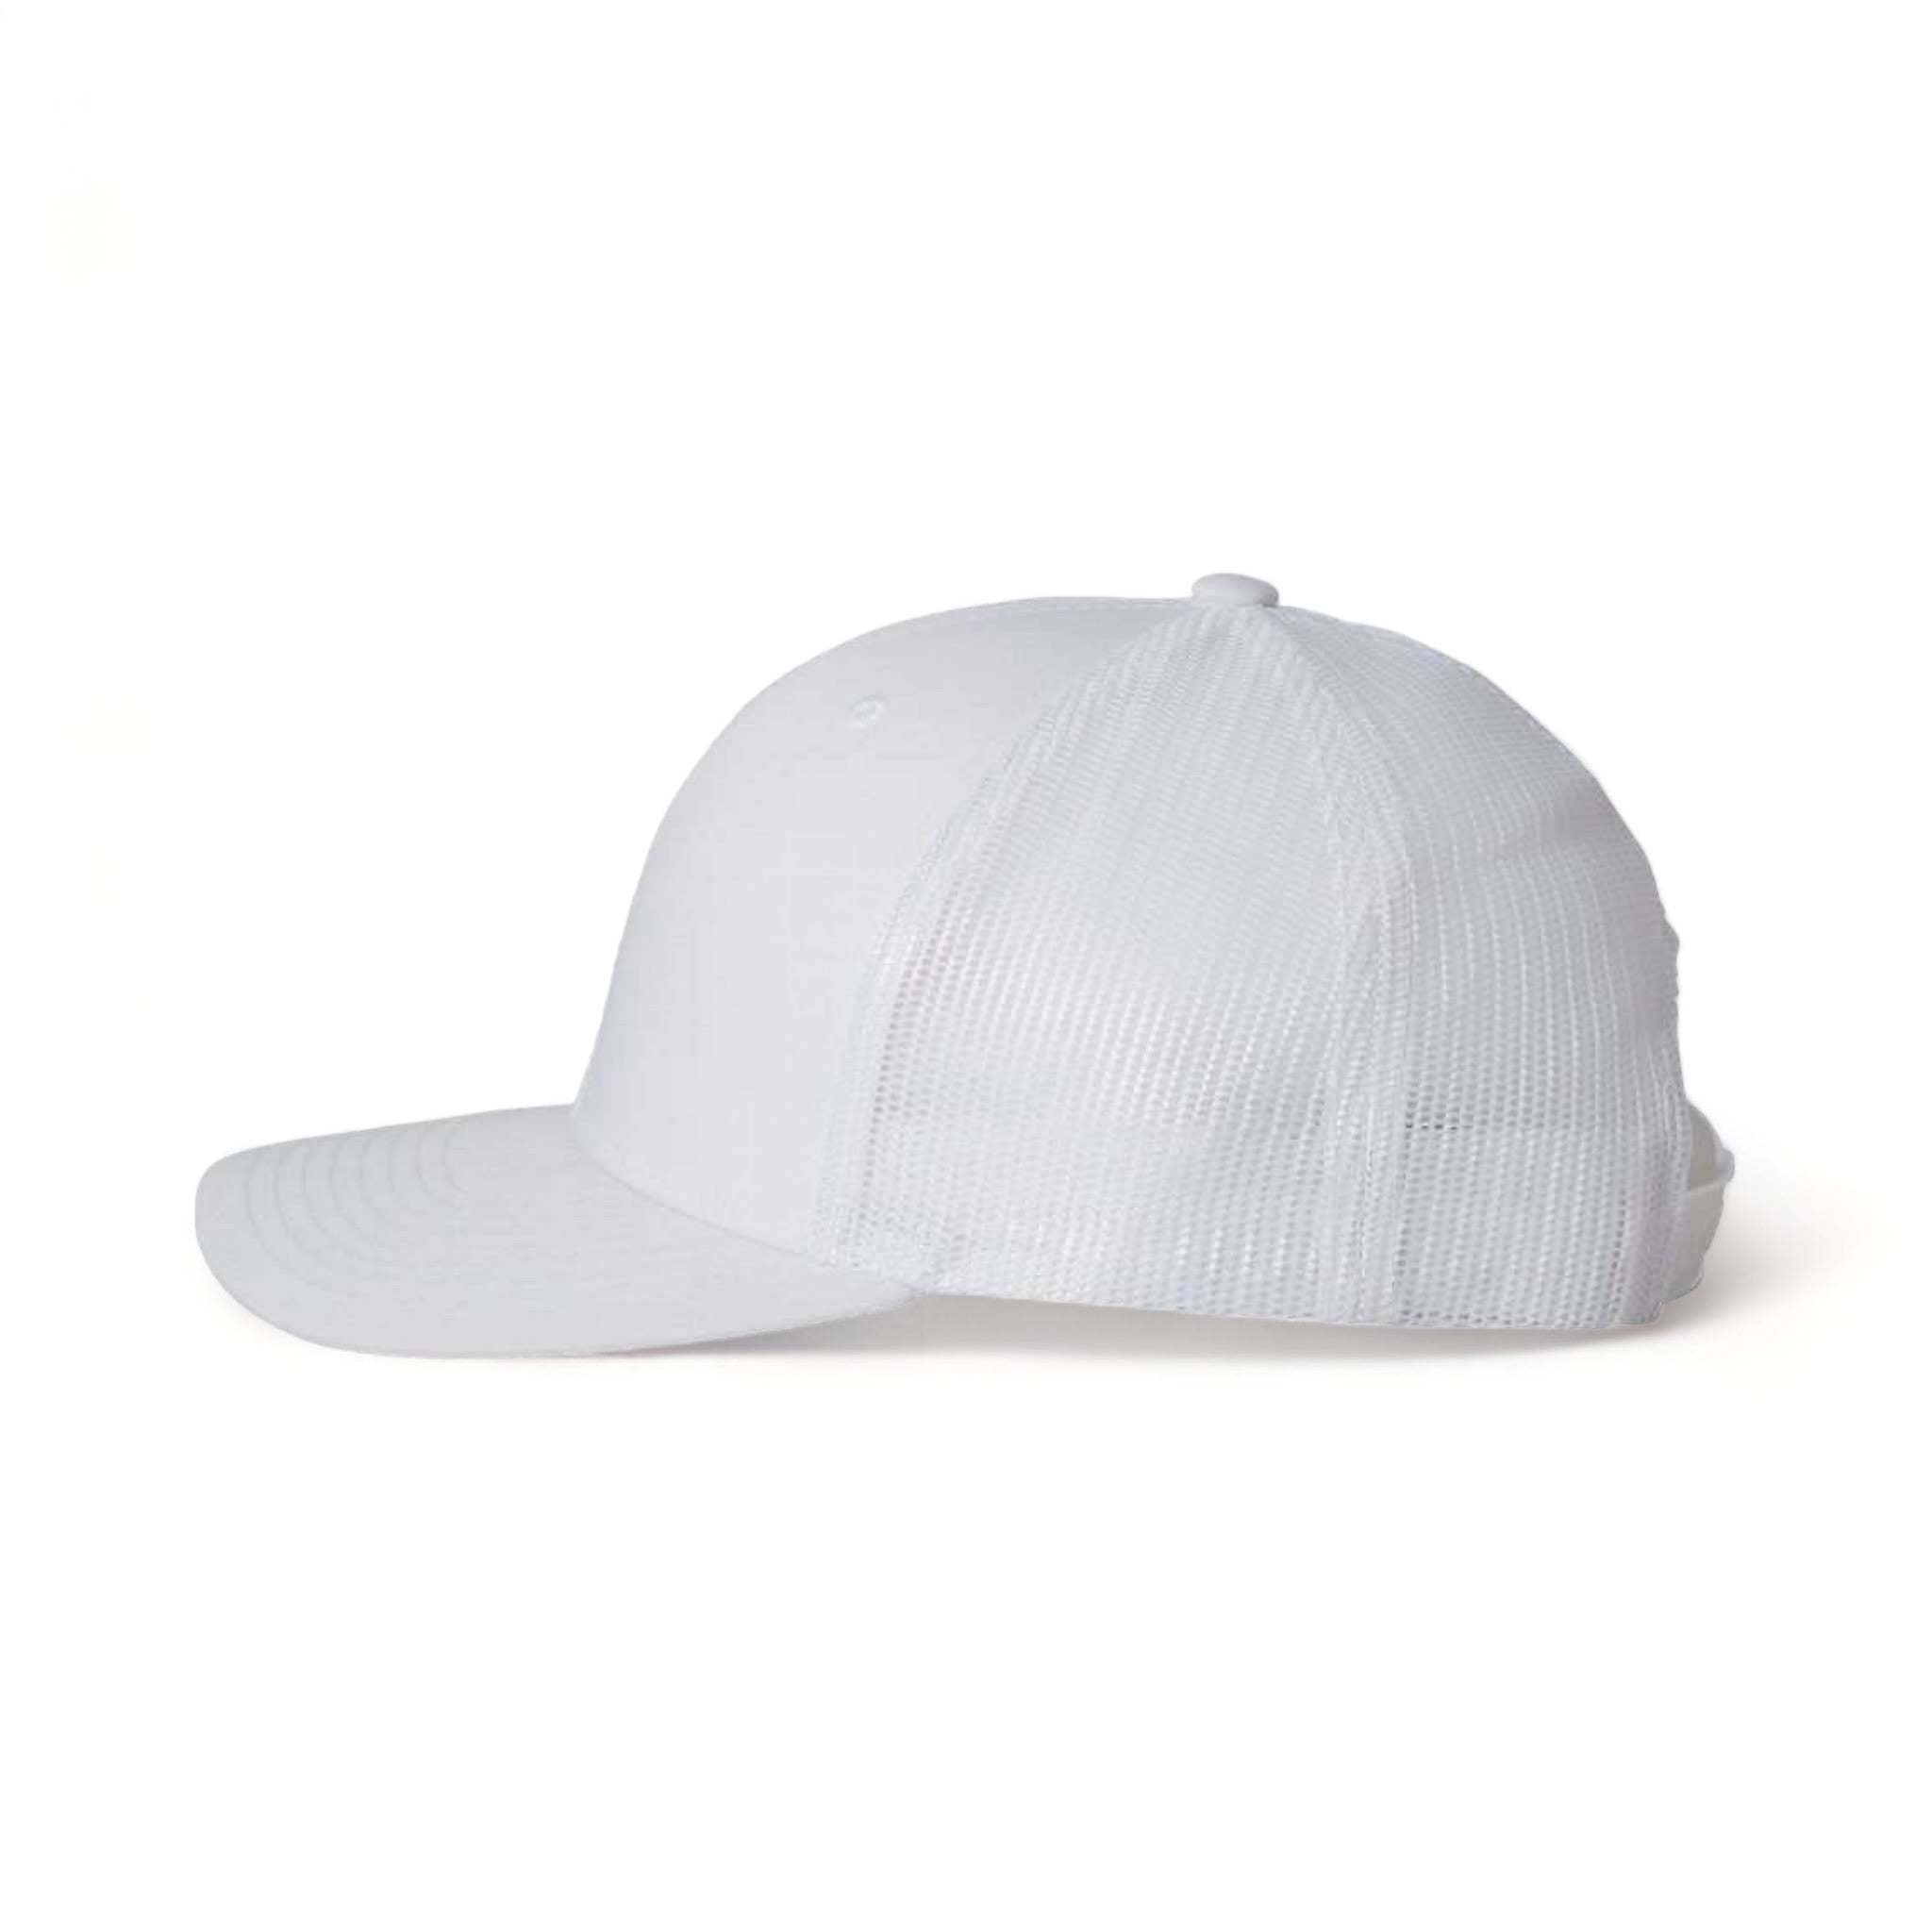 Side view of YP Classics 6606 custom hat in white